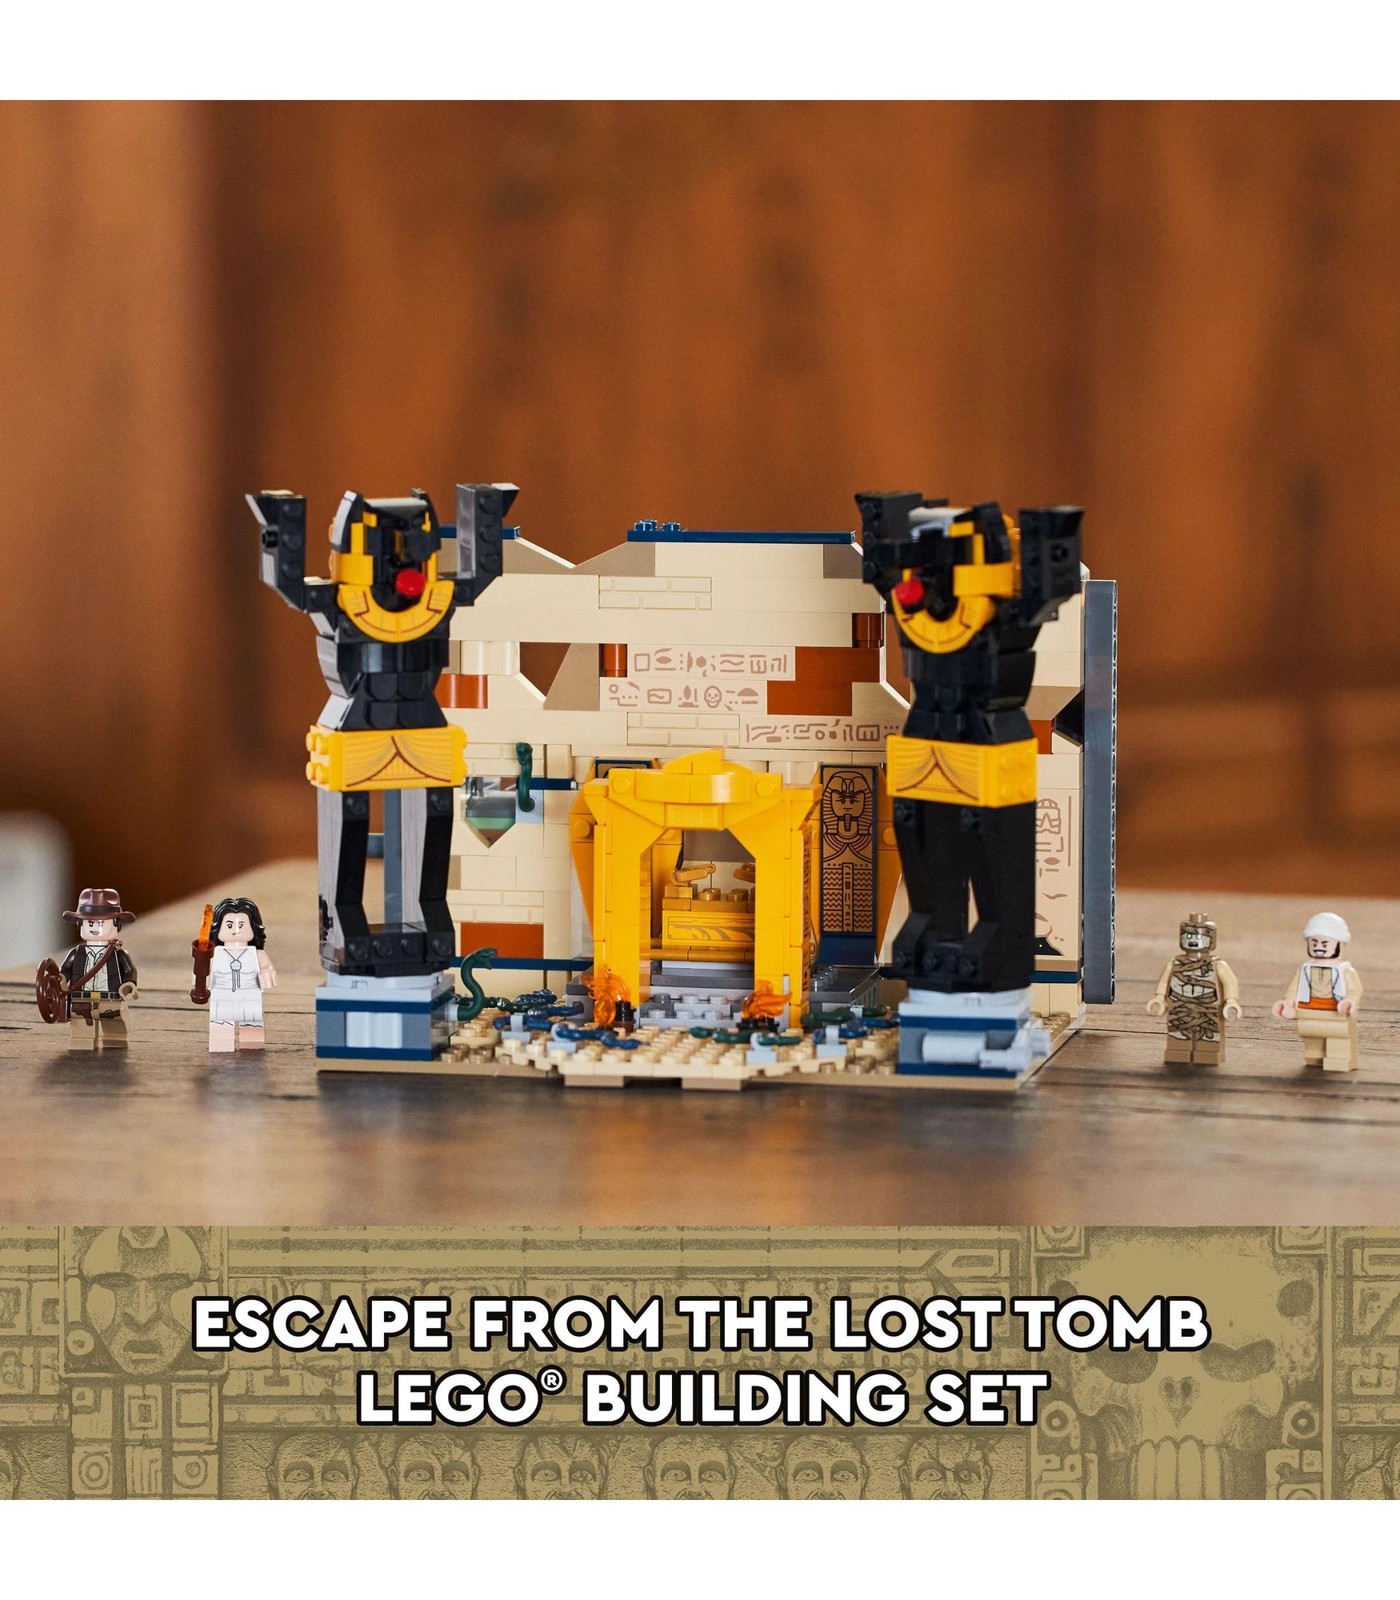 Escape from the Lost Tomb 77013, LEGO® Indiana Jones™